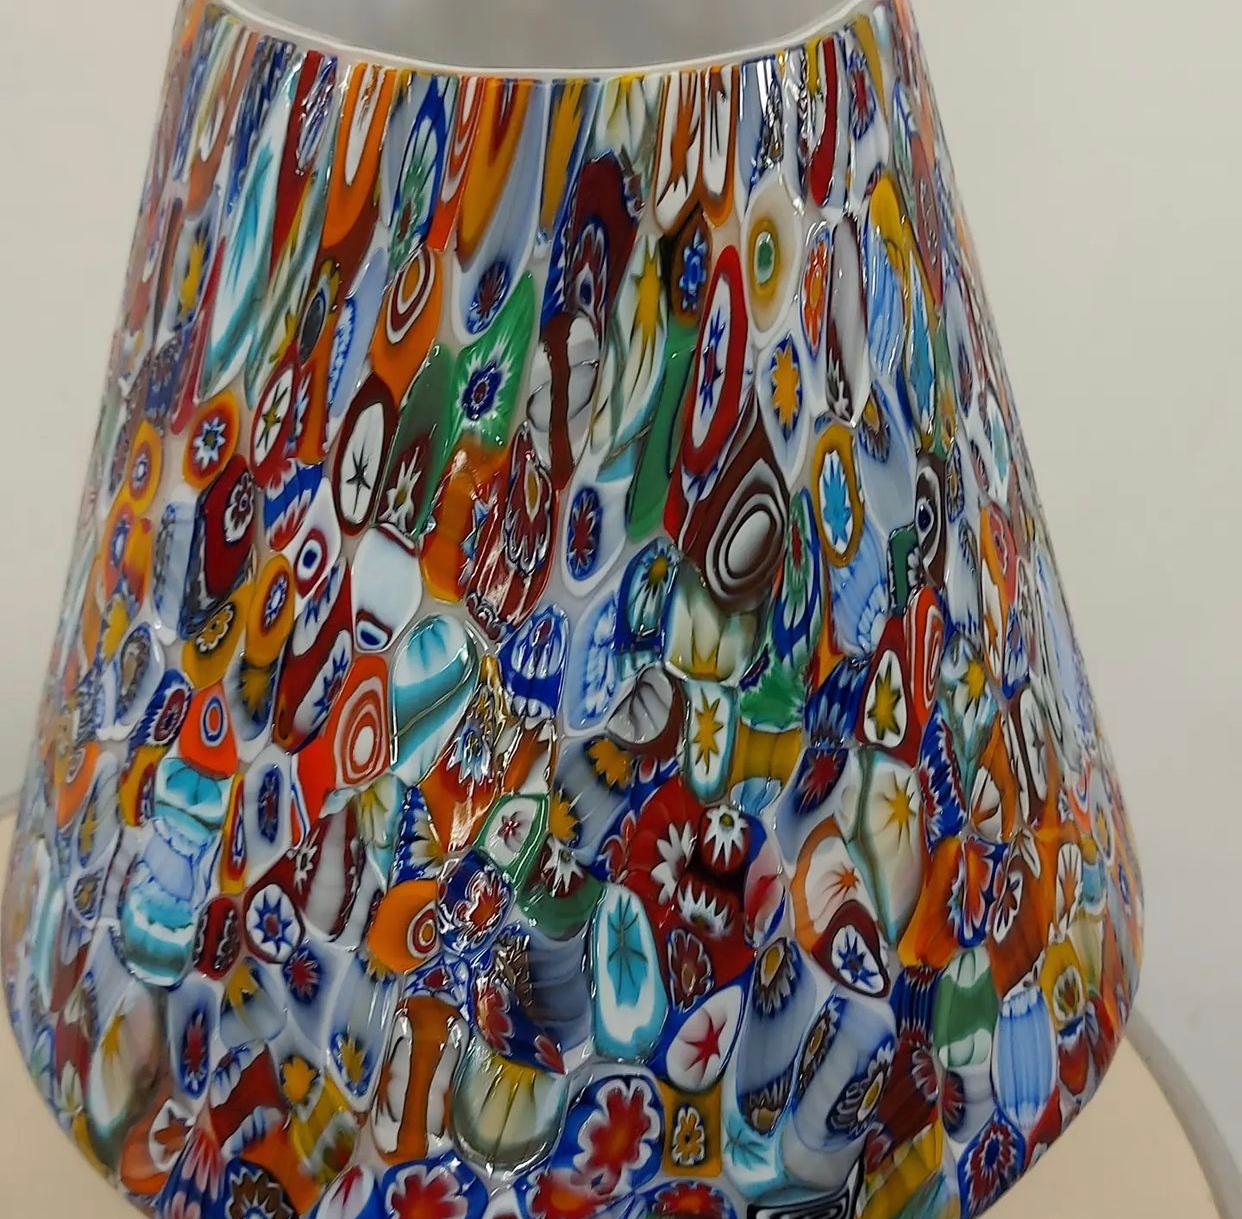 Pair of Big Hancrafted Murano Table Lamps Murrine Millefiori Decor, Italy 2000's For Sale 4